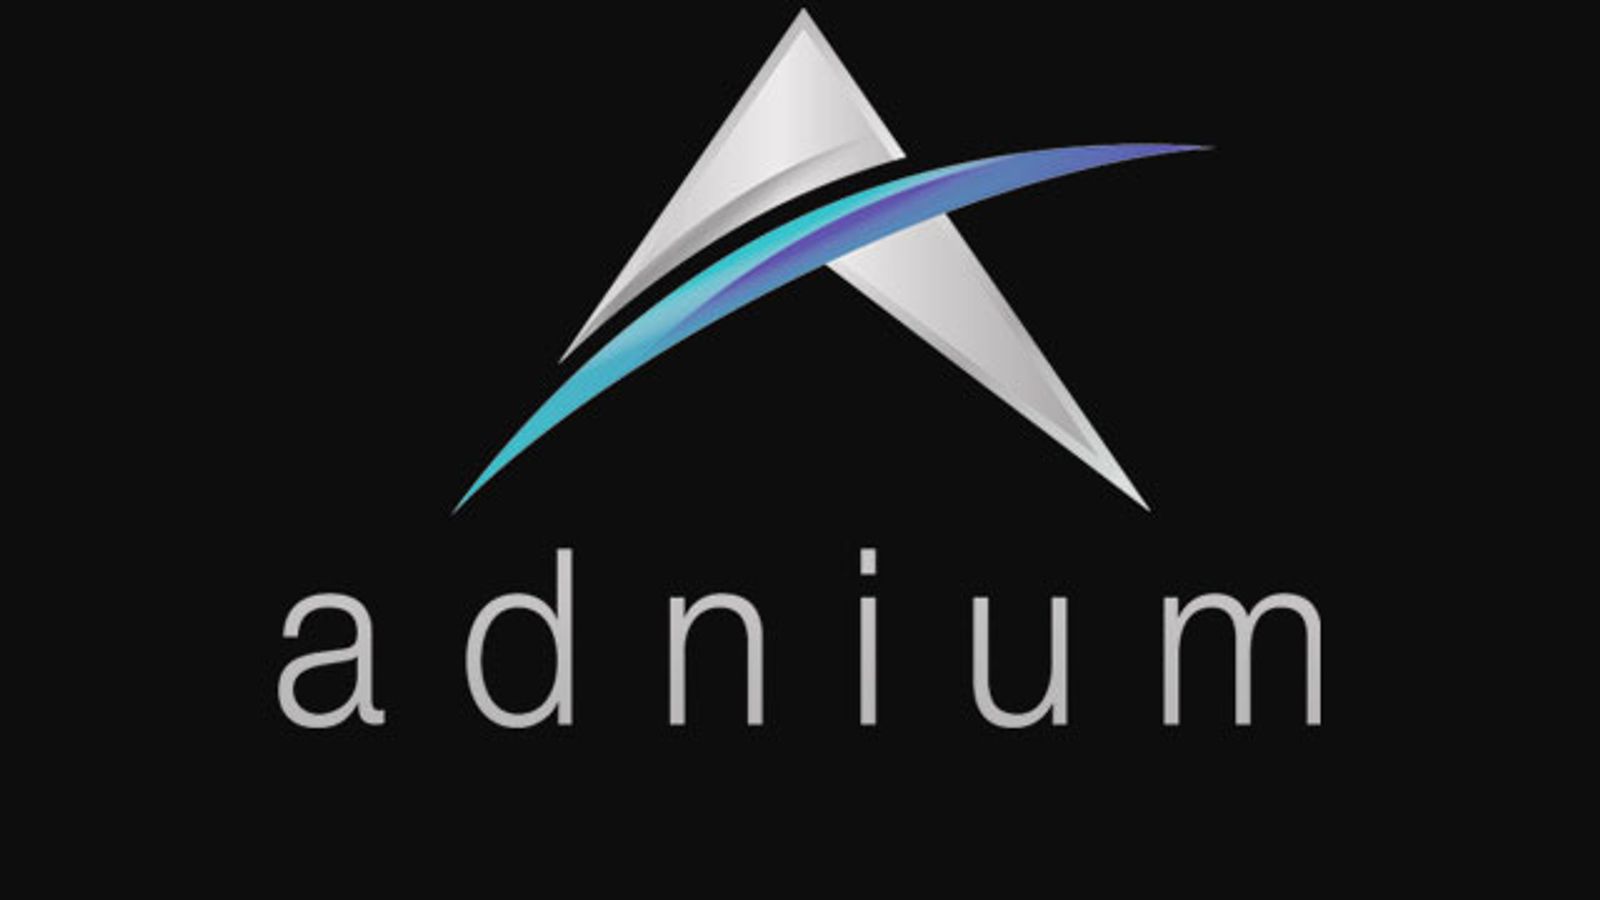 Adnium Doubles Monthly Impressions, Introduces New Zones